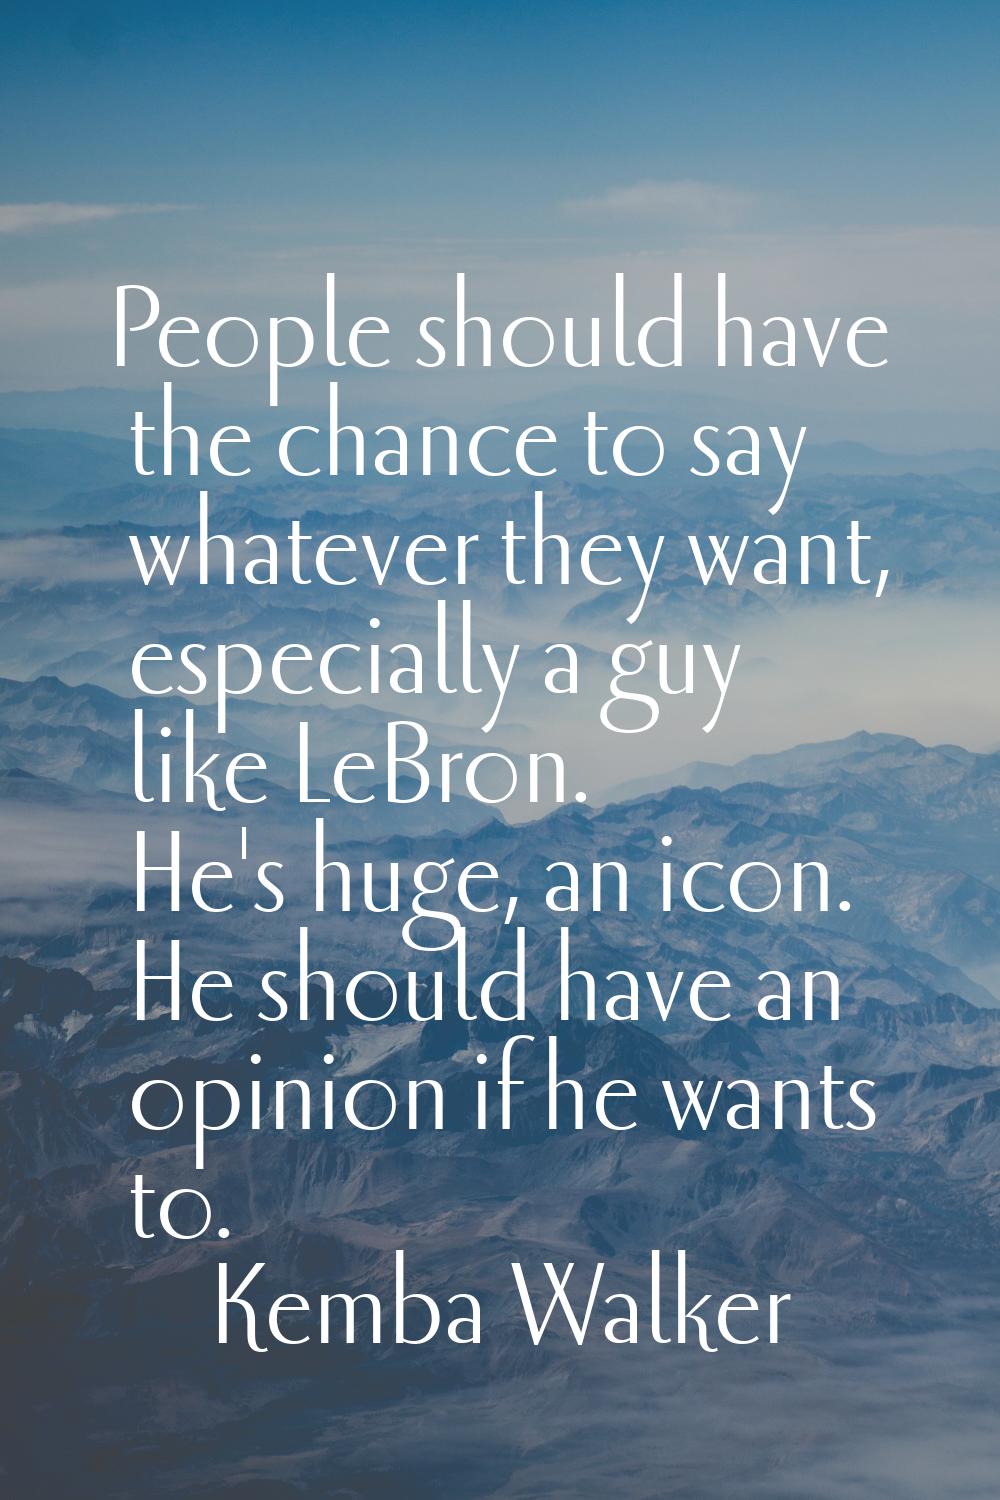 People should have the chance to say whatever they want, especially a guy like LeBron. He's huge, a